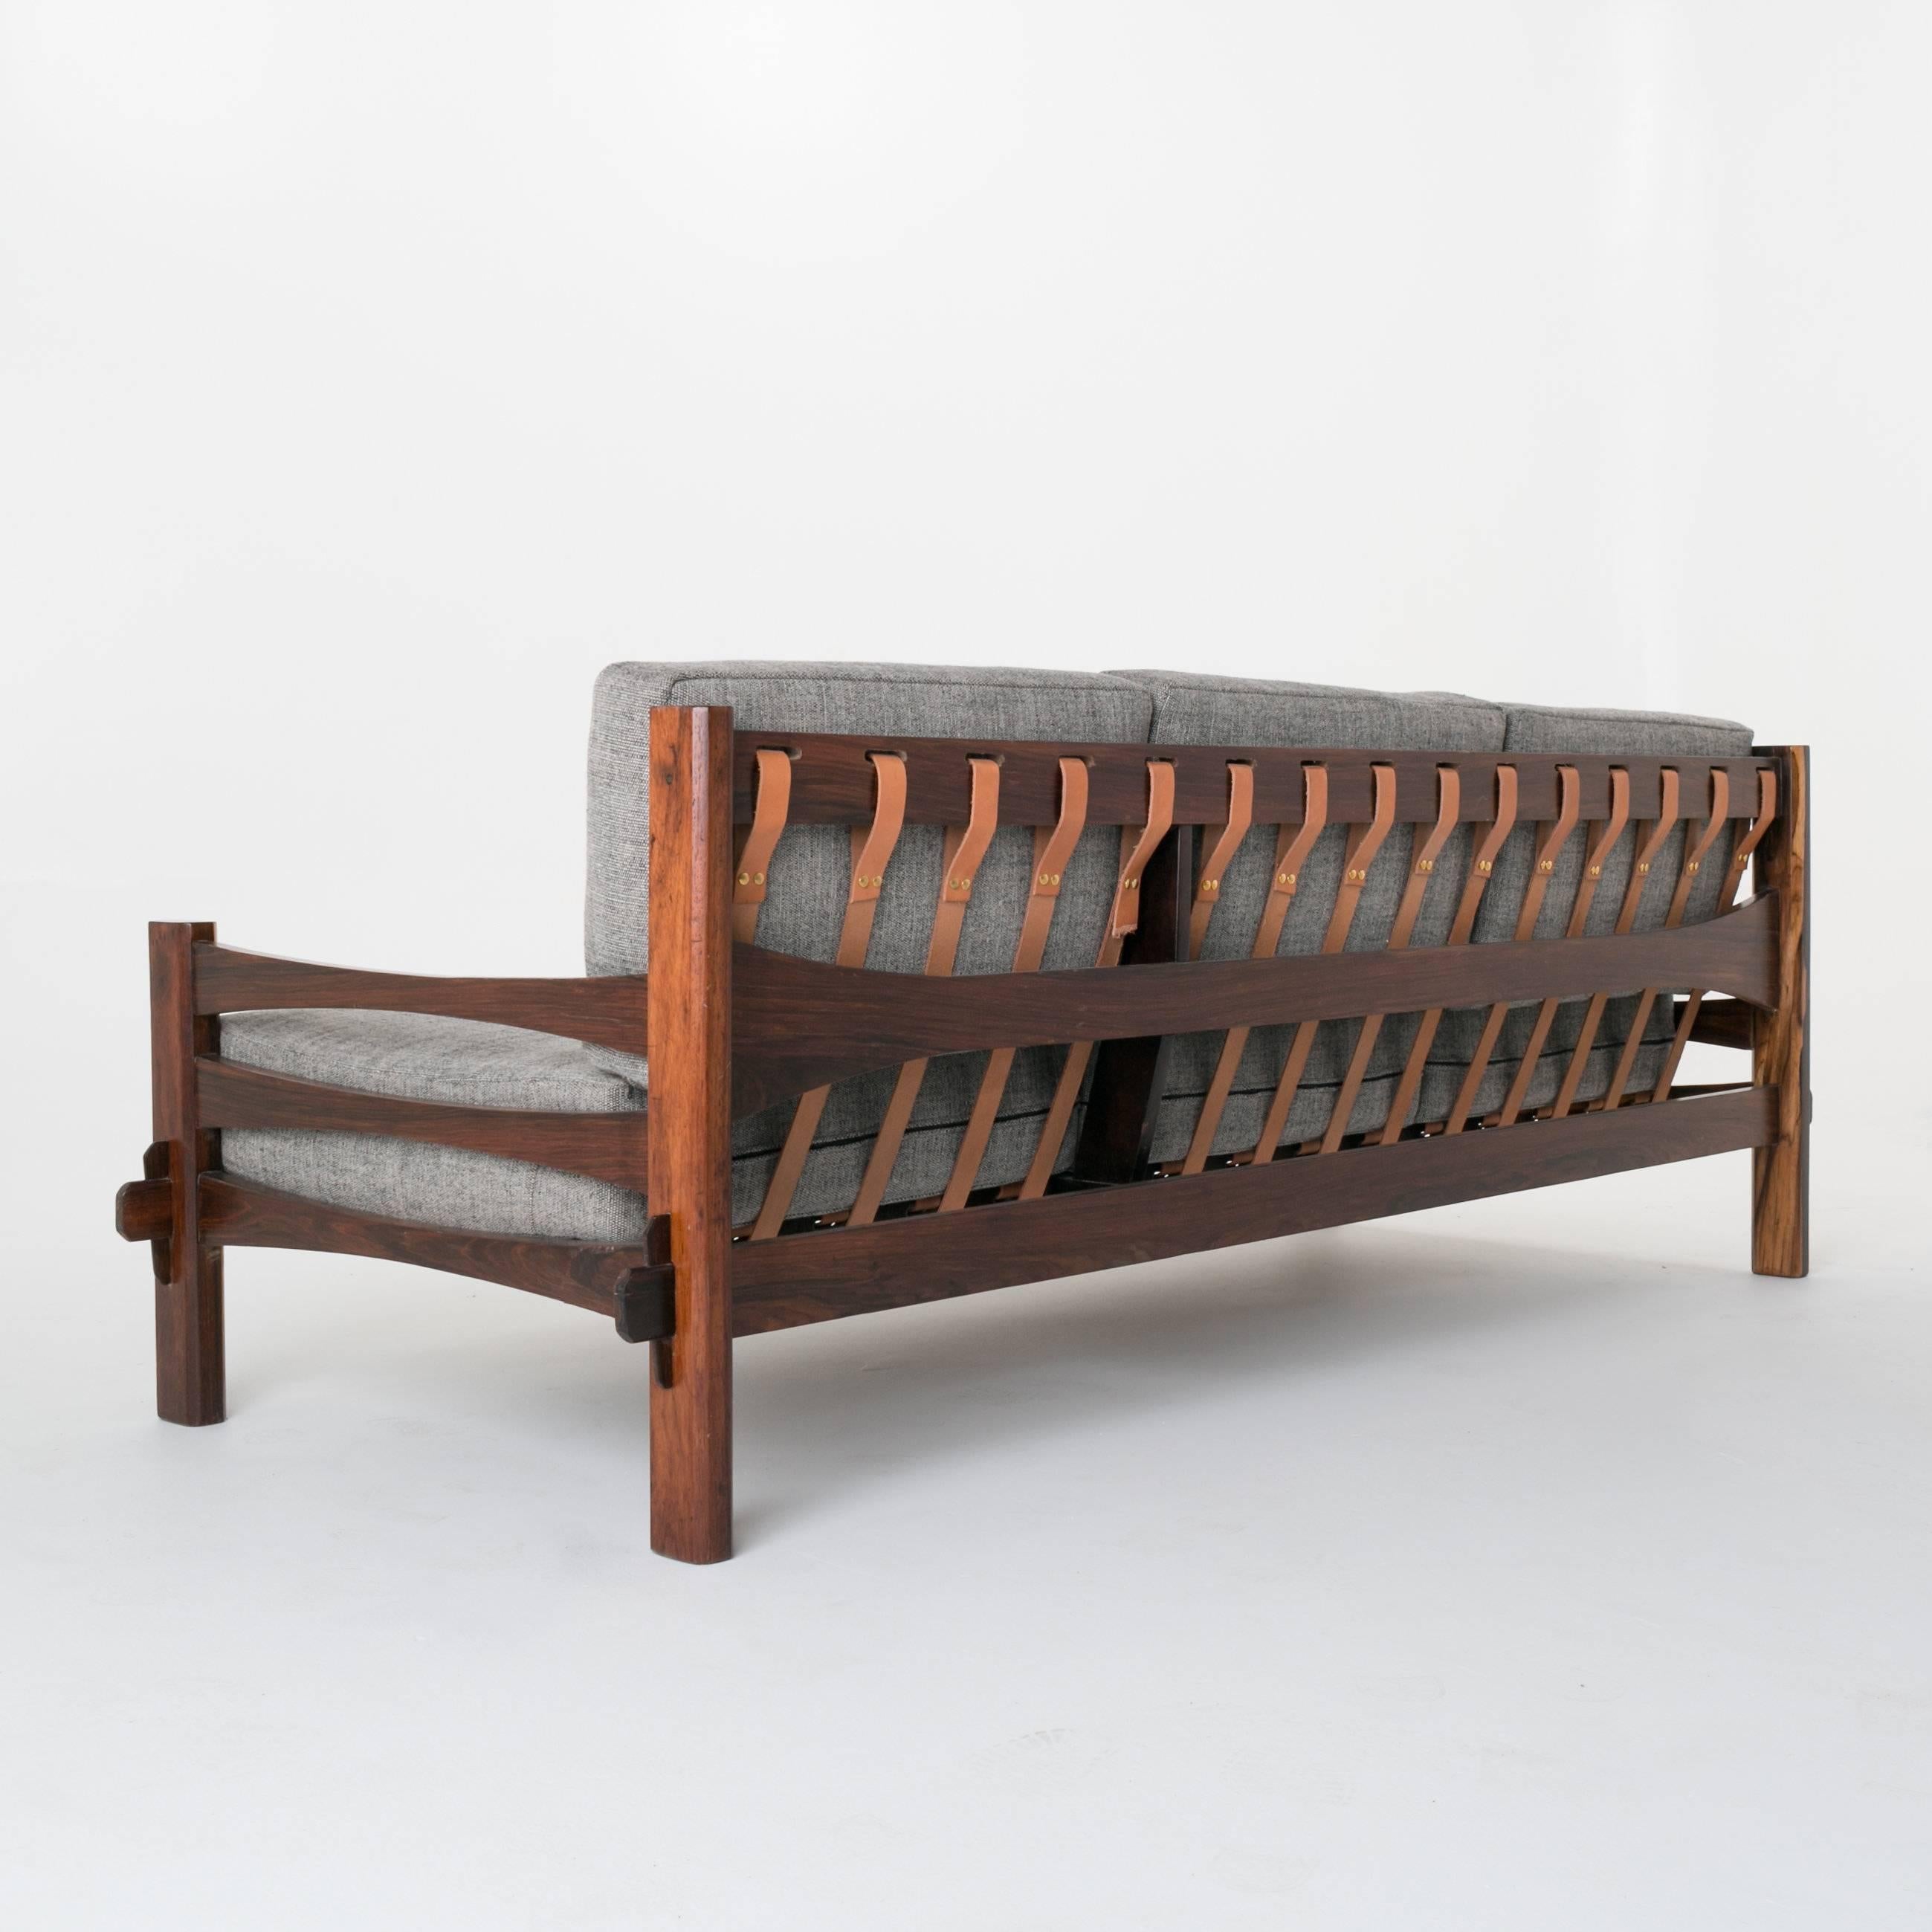 Simple Brazilian rosewood sofa. The decking in the sofa has been done in leather straps. The sap grain from the rosewood is exquisite. 

In order to preserve our inventory, after restoration we blanket wrap and store nearly every piece in our